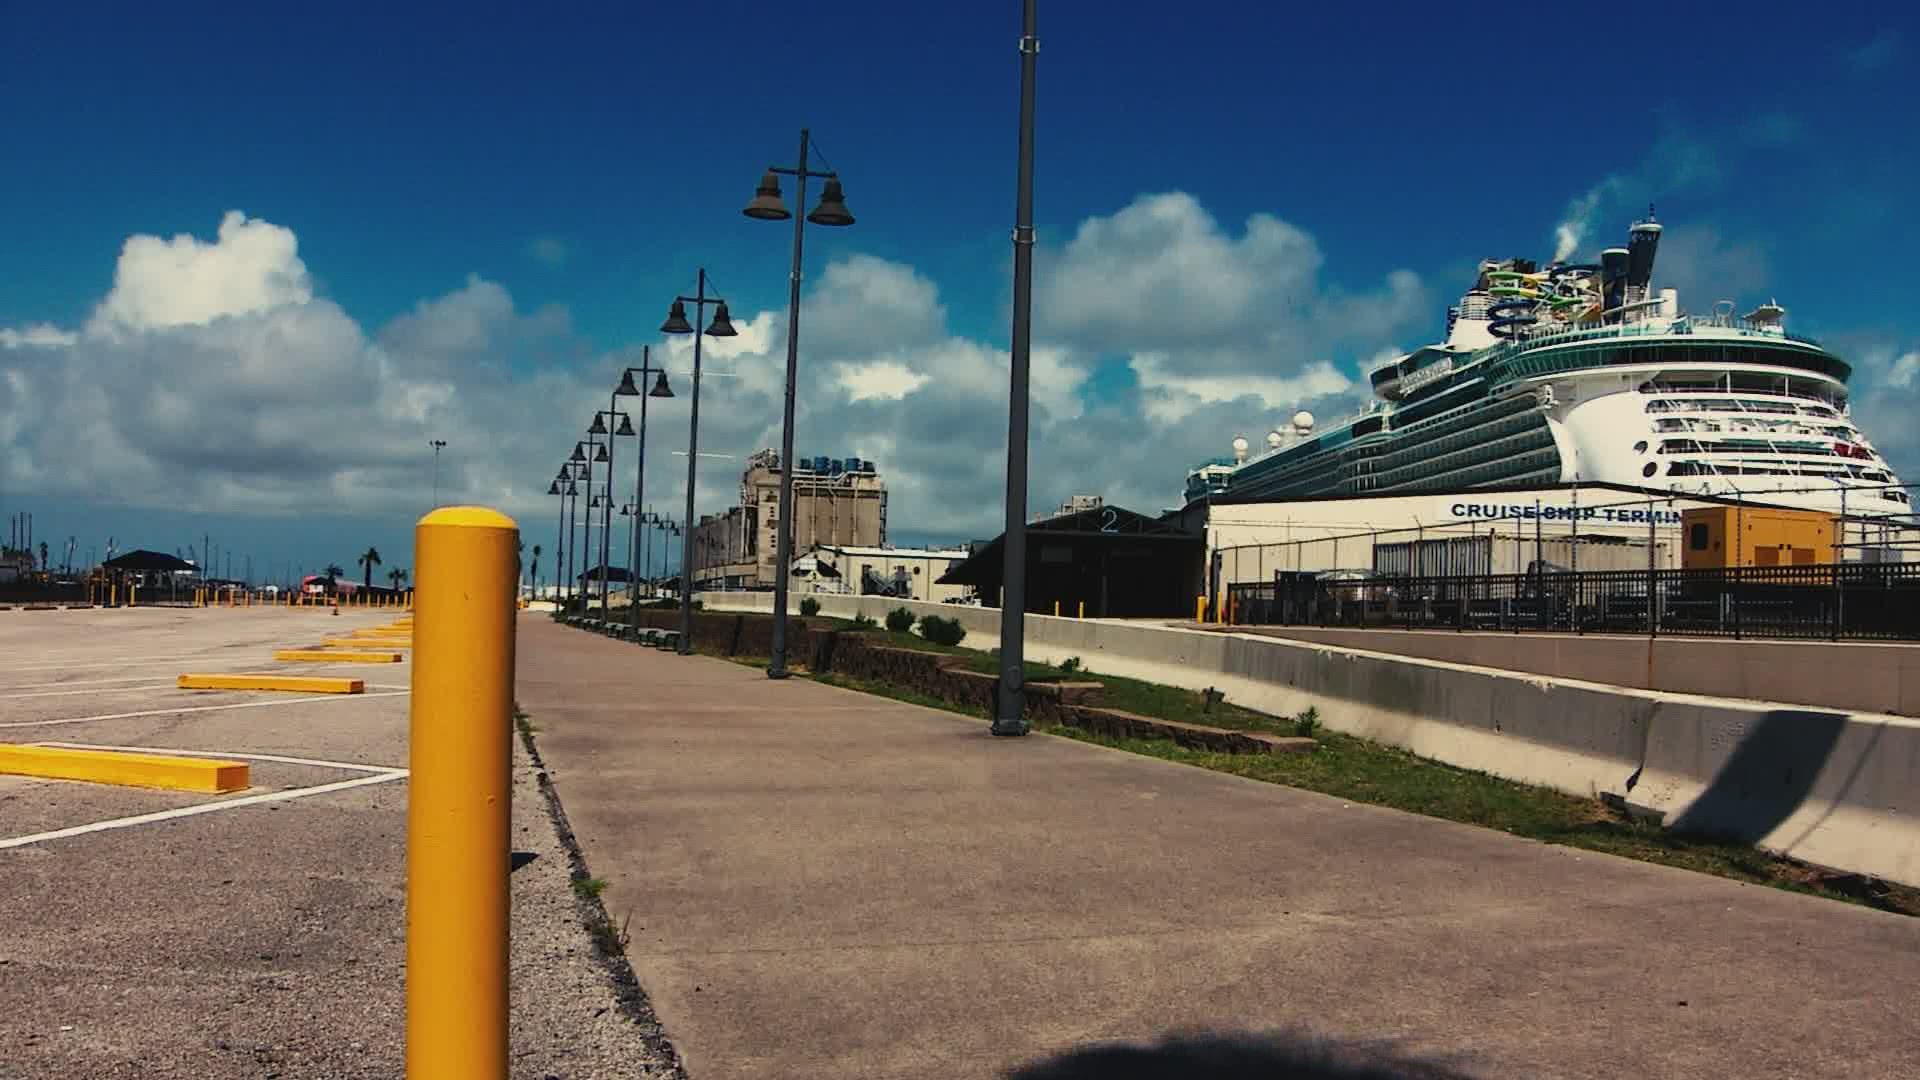 The Port of Galveston says they pulled the free parking option to compete with nearby parking businesses.